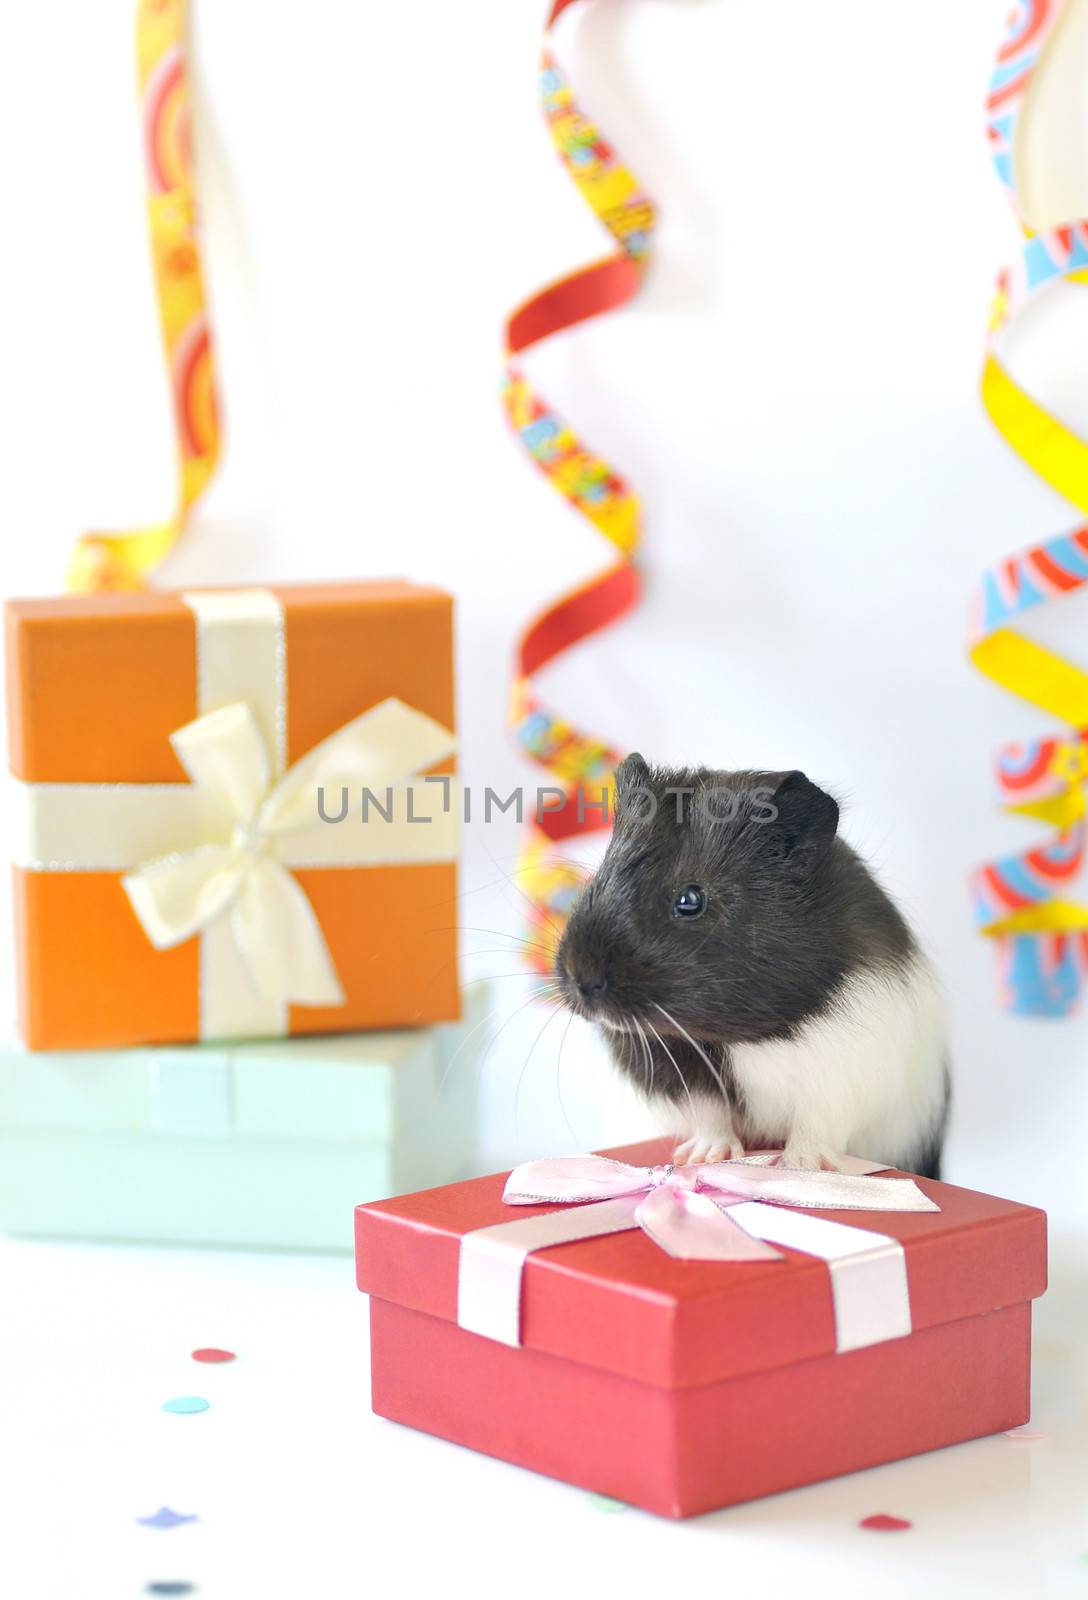 guinea pig and gifts by mady70